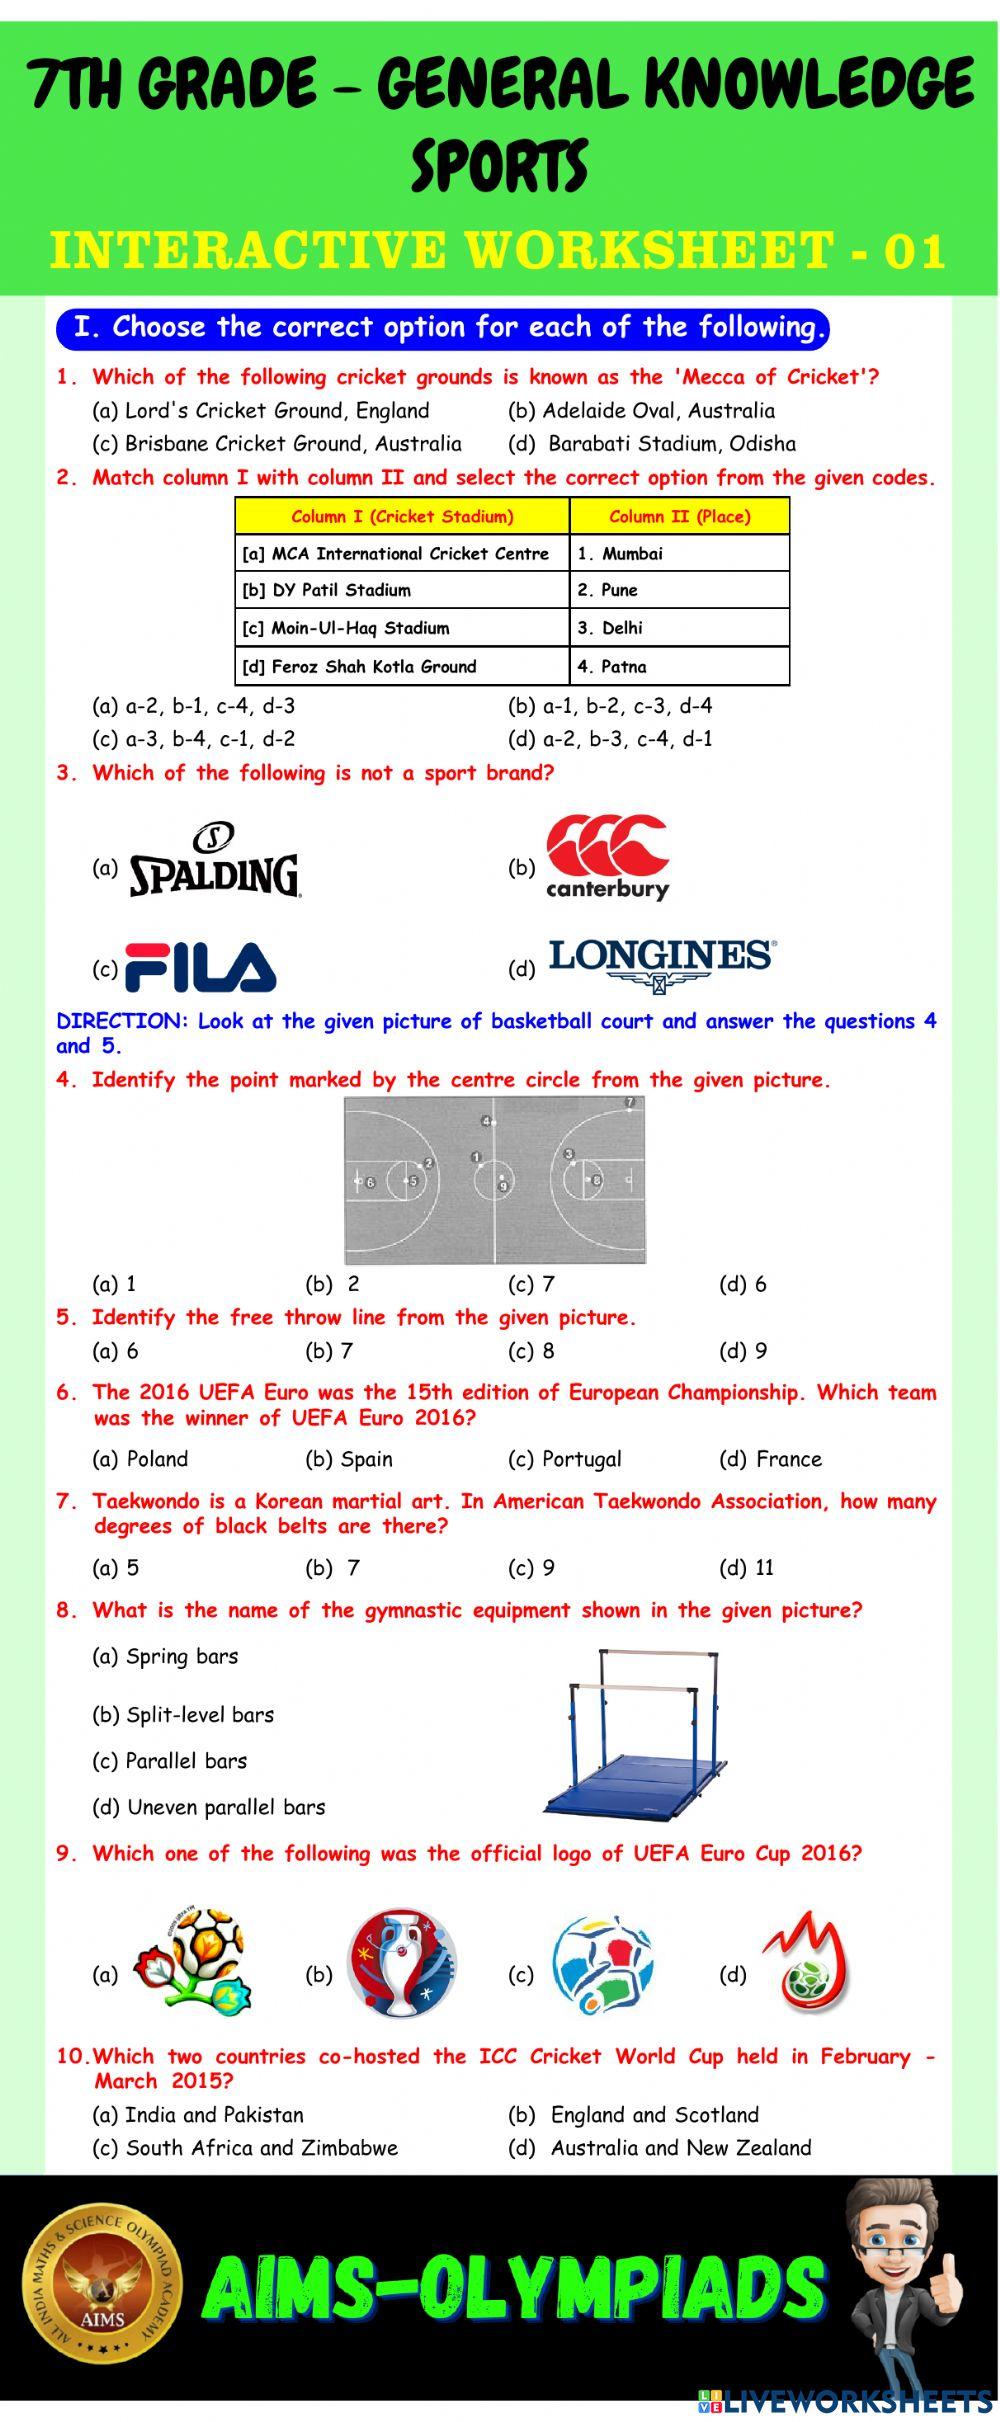 7th-general knowledge-ps01-sports